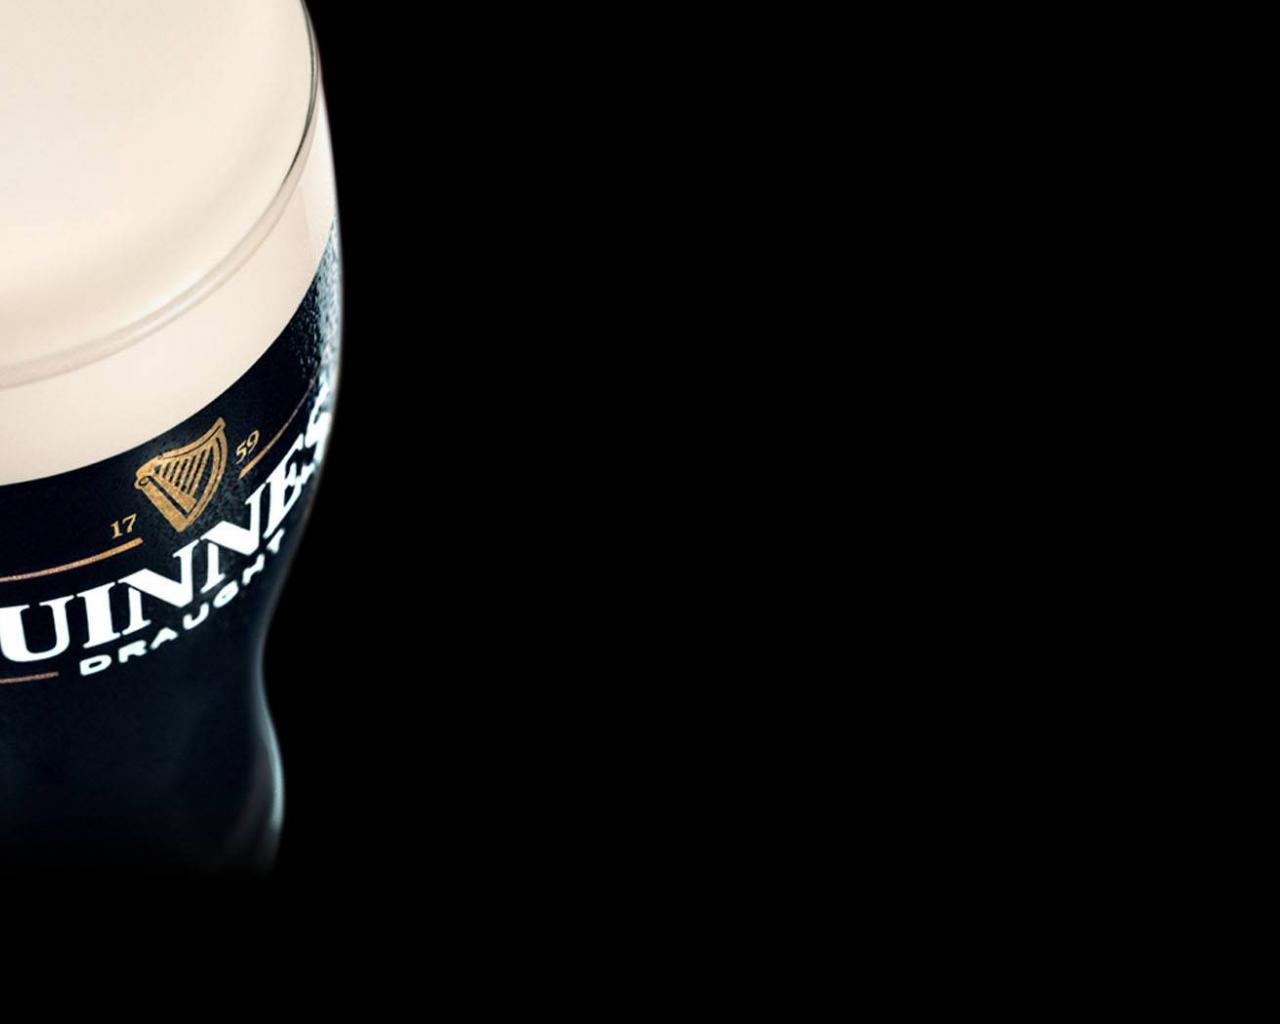 Guinness Wallpaper High Quality And Resolution